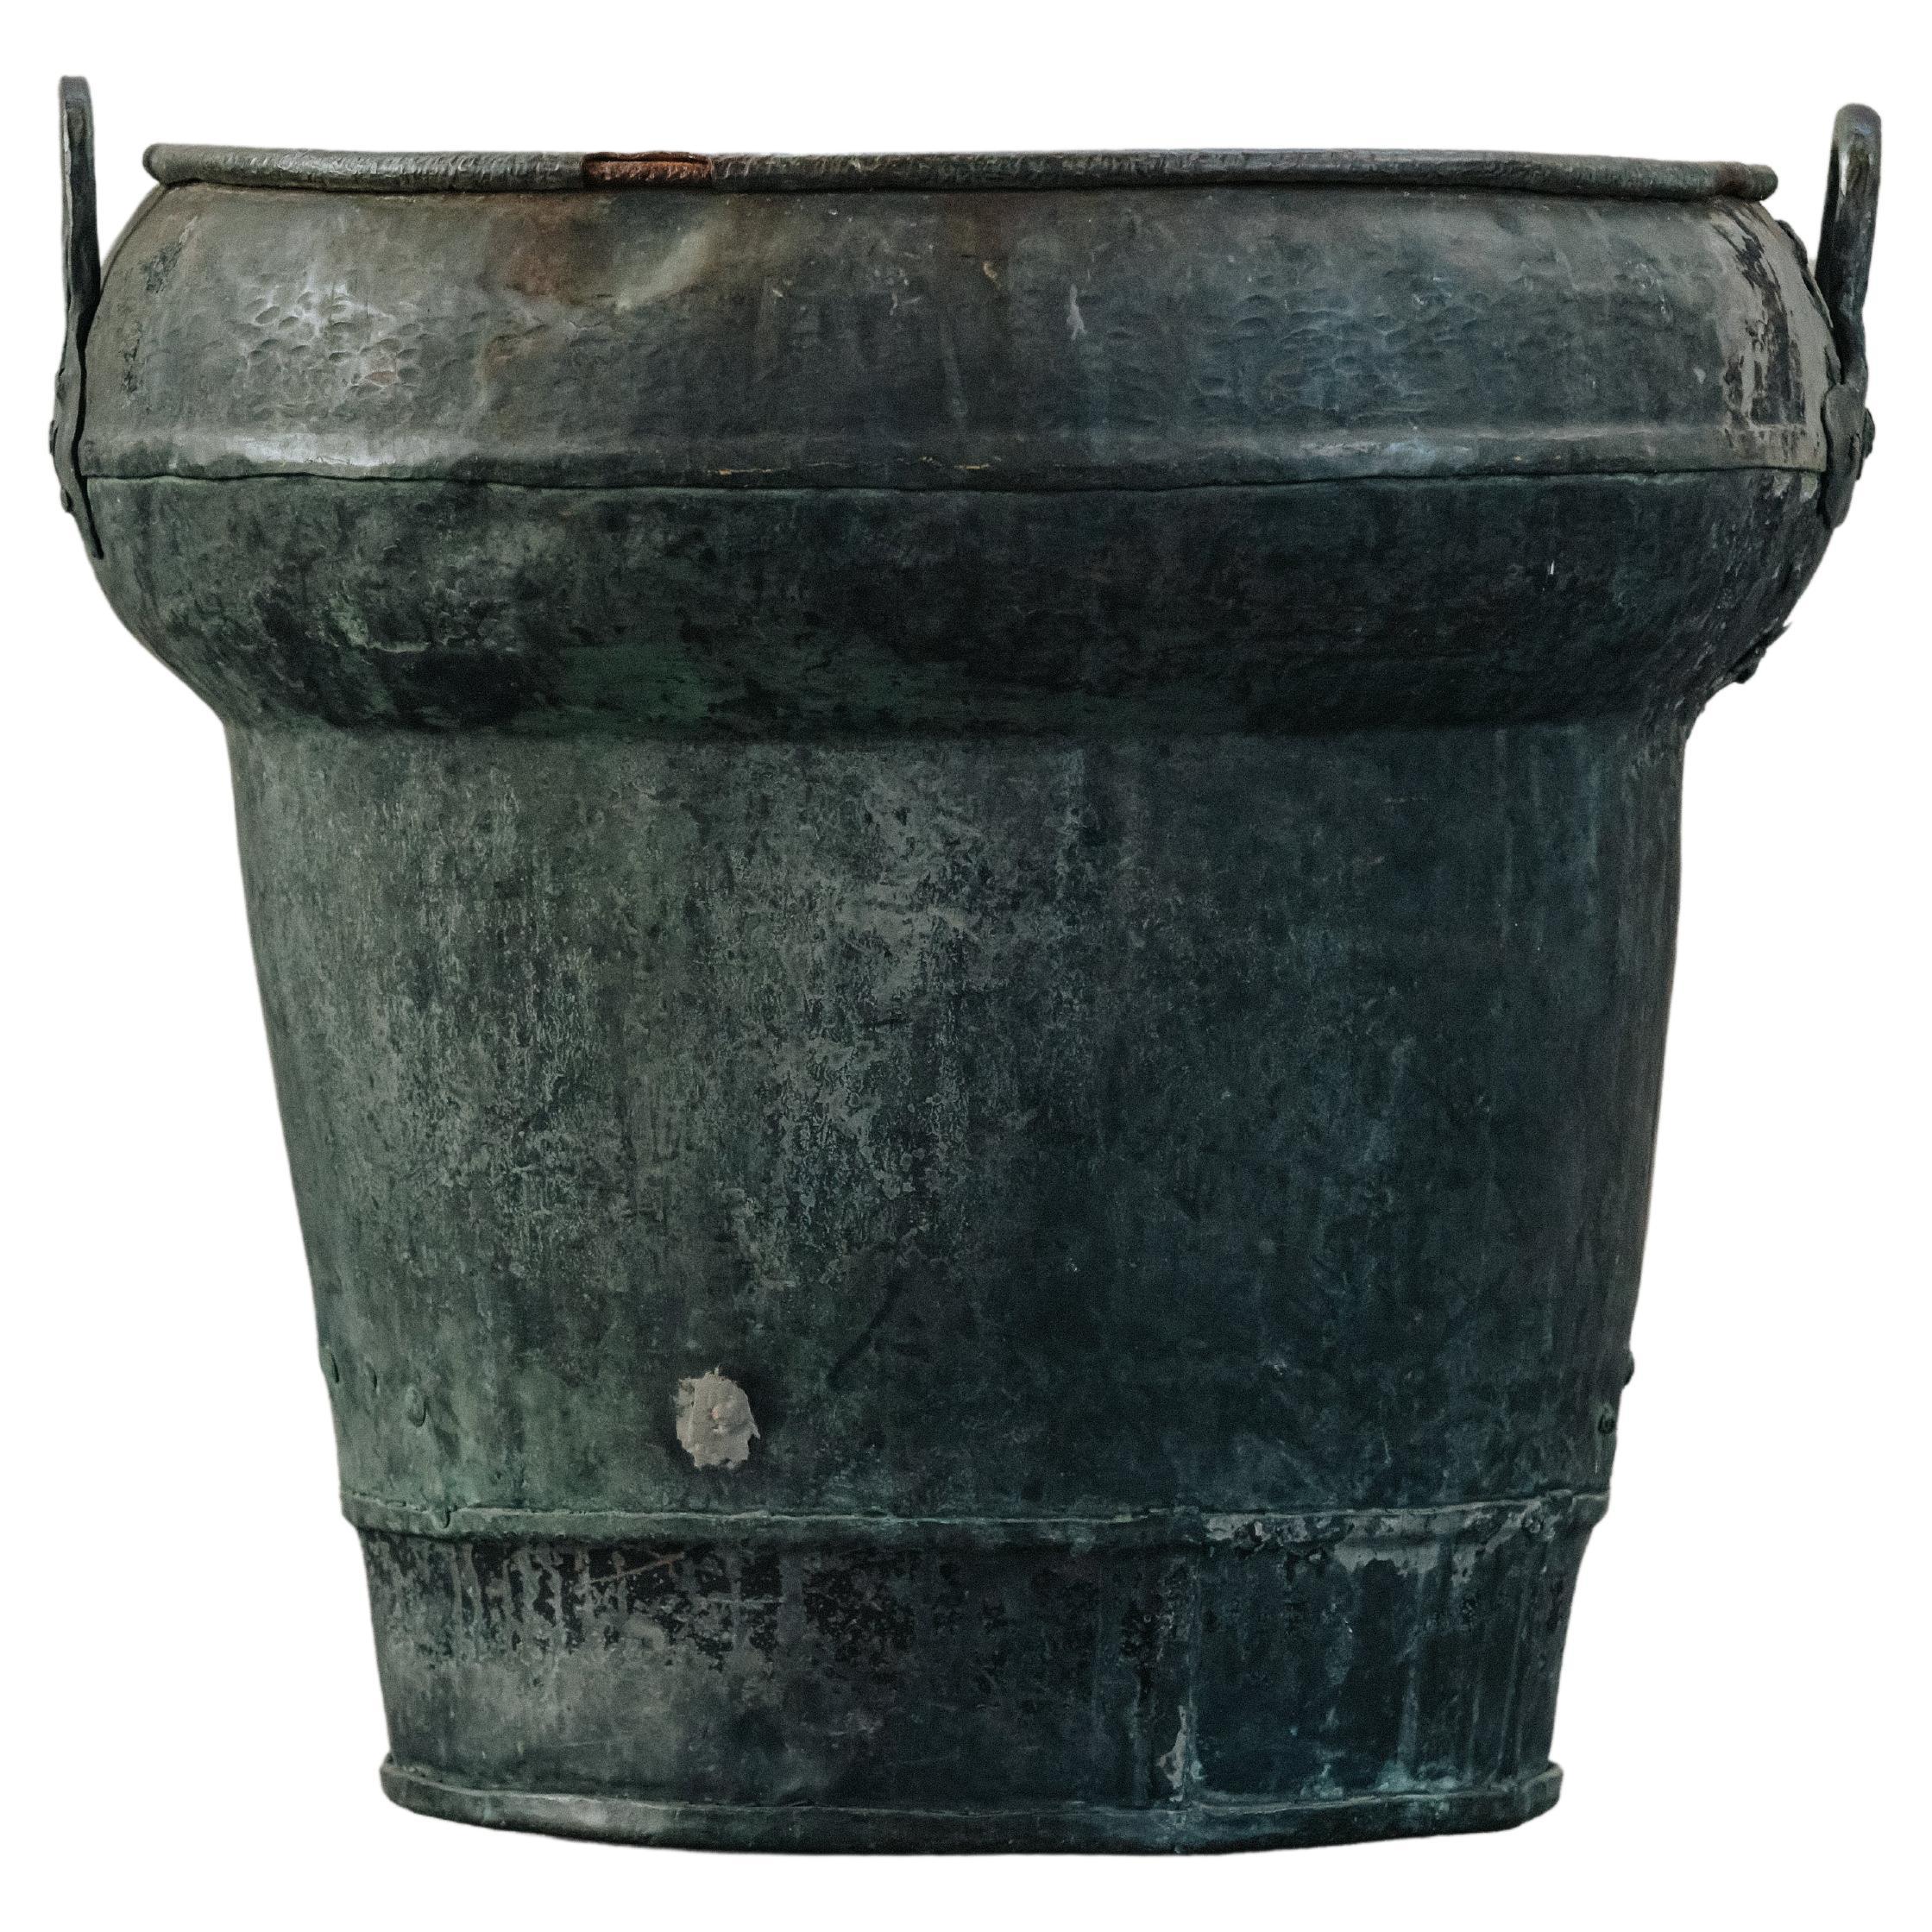 Early Copper Barrel From Sweden, Circa 1800